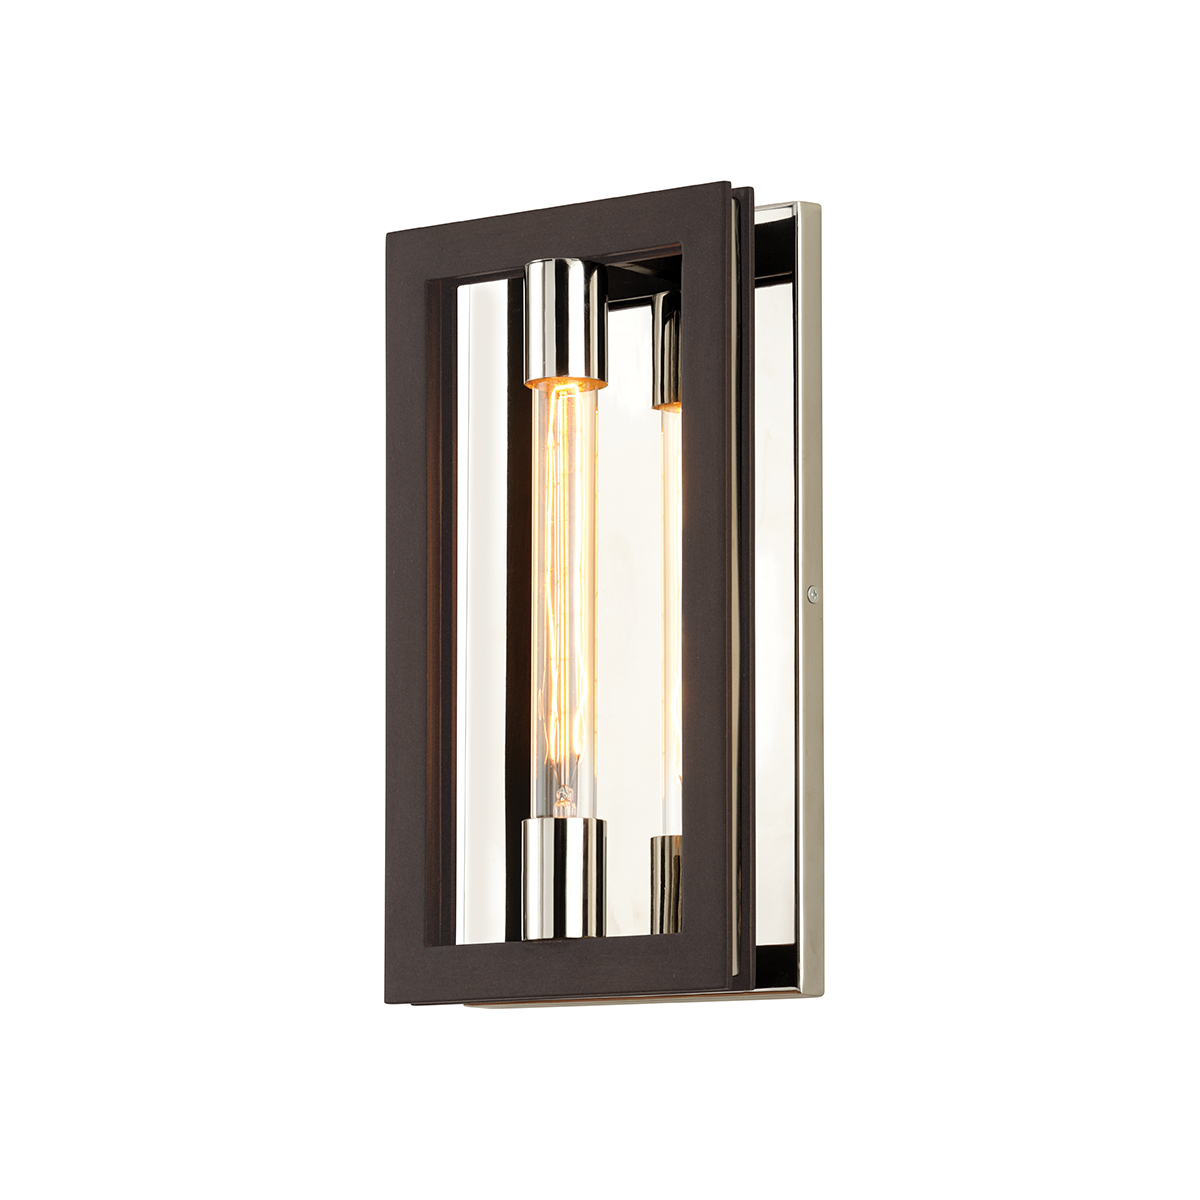 Troy Lighting Enigma Wall Sconce Wall Sconce Troy Lighting BRONZE WITH POLISHED STAINLESS 7.75x7.75x14 